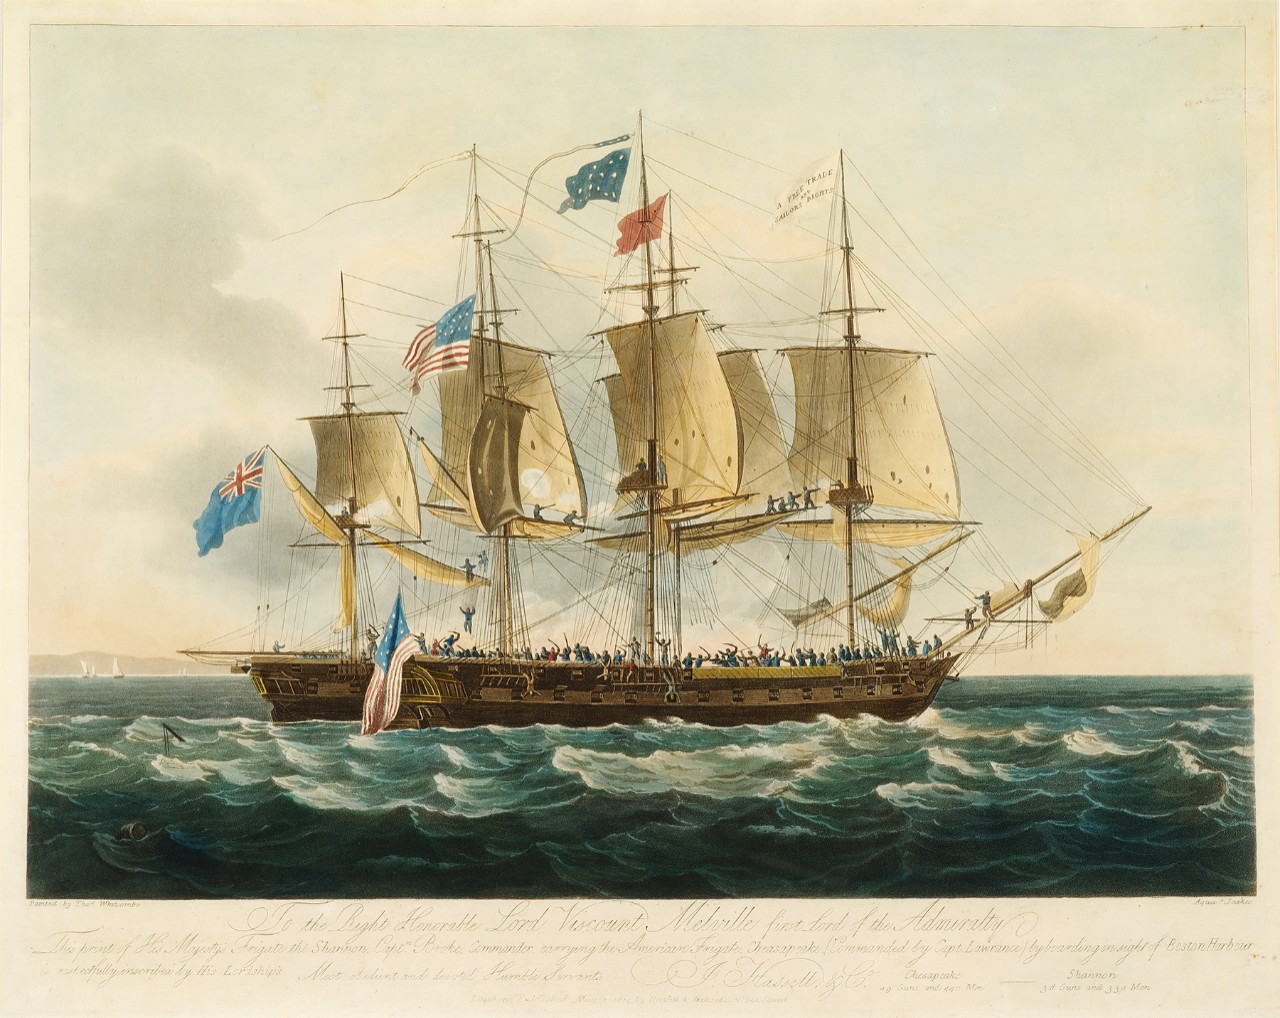 Two ship in combat in close quarters with crews fighting on the deck of the American ship, the American flag is in the water</p>